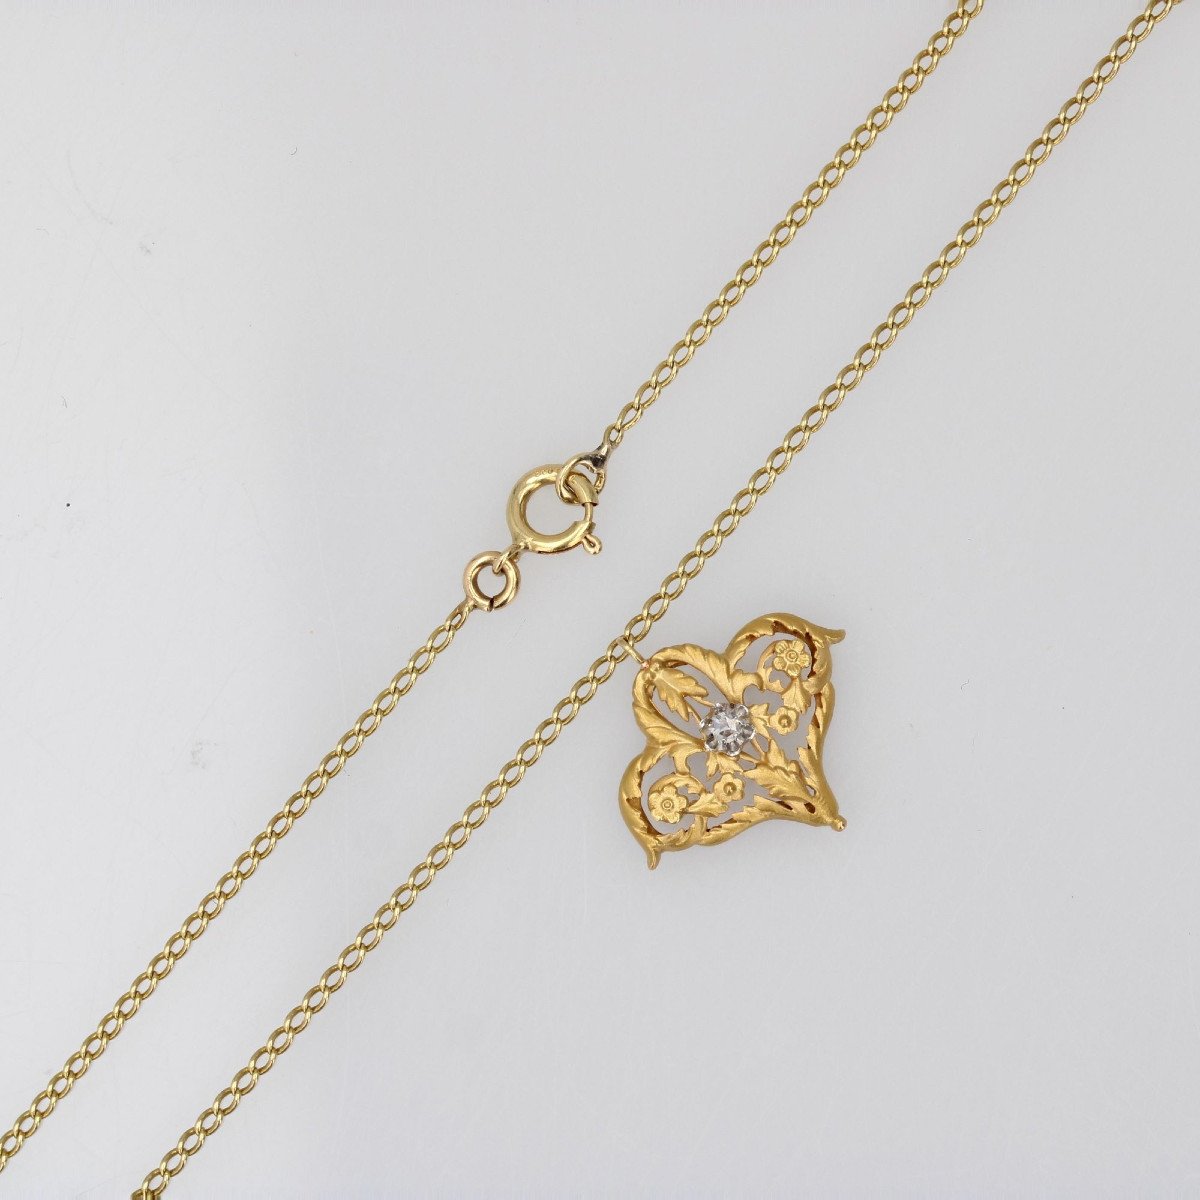 Old Chain And Its Arabesque And Rose-cut Diamond Pendant-photo-6